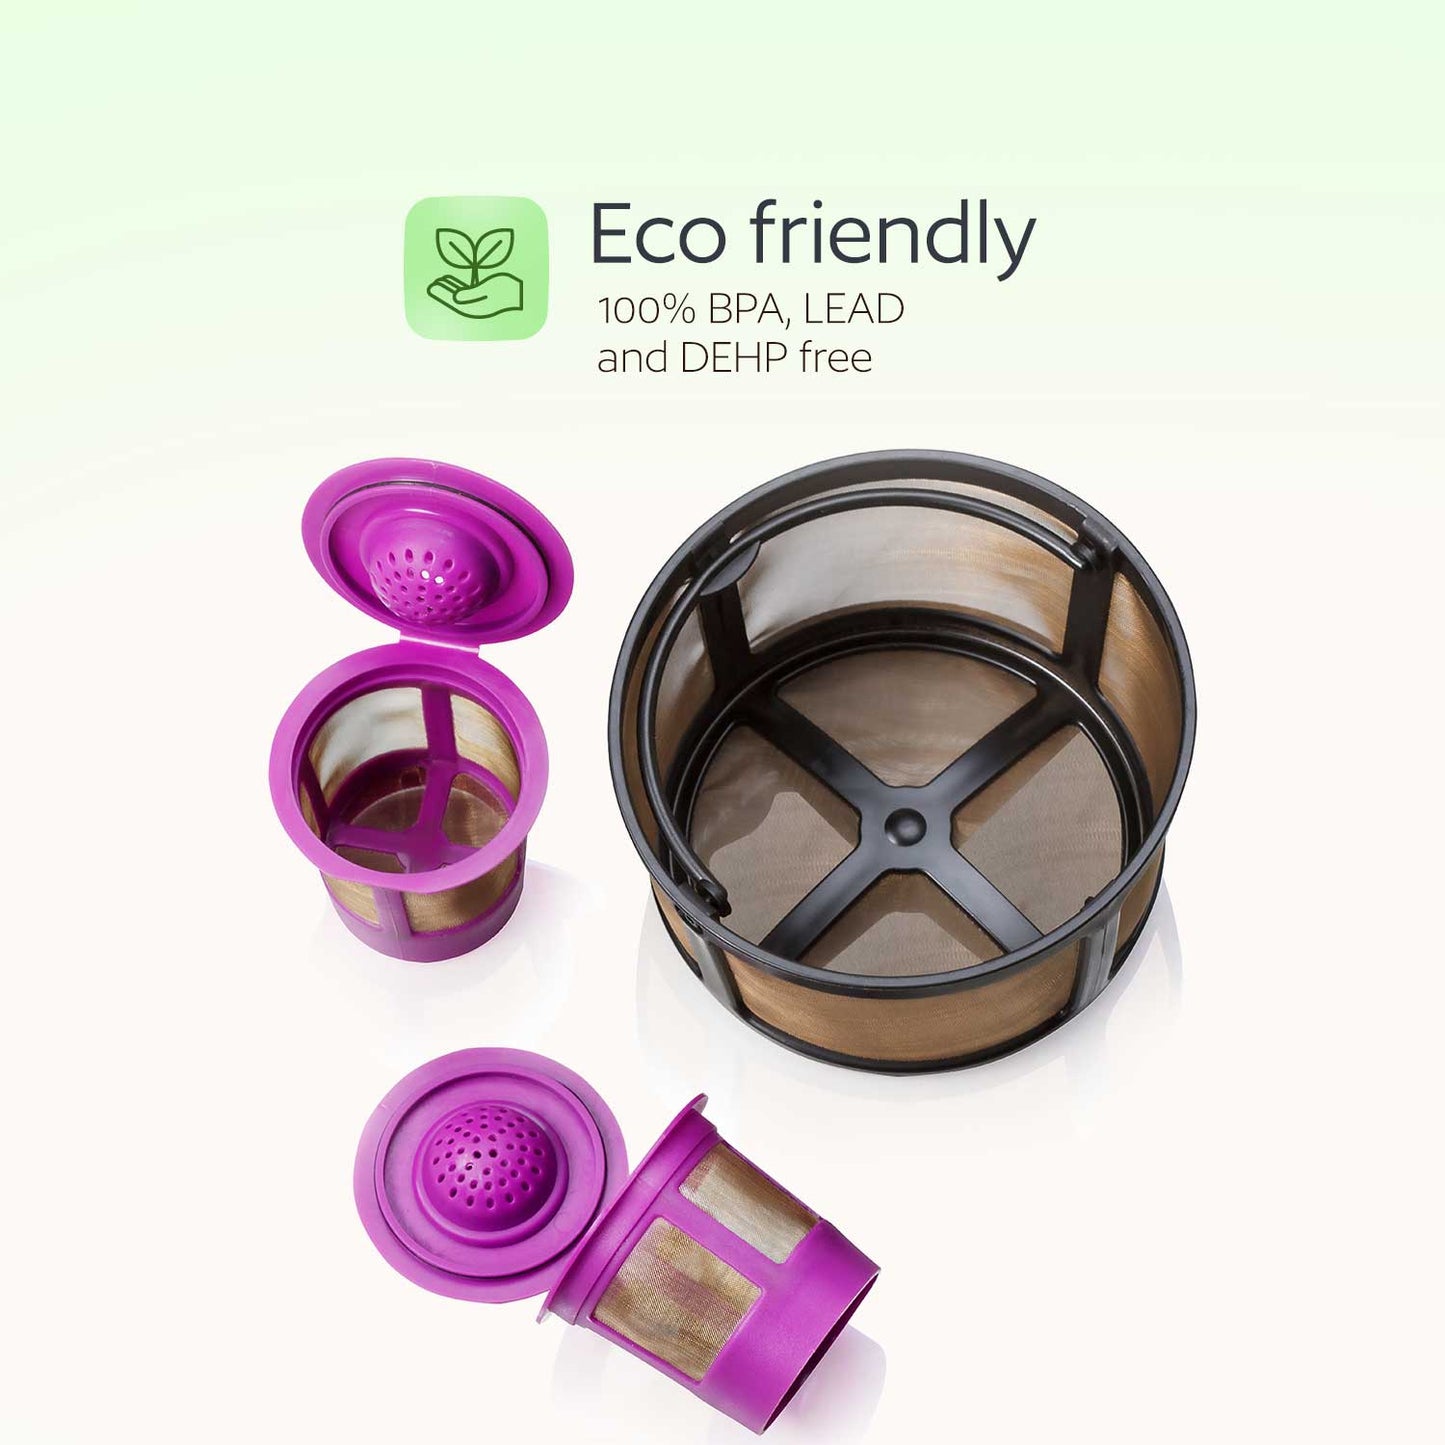 Keurig K Duo Coffee Filter and 2 Reusable K Cups for K-Duo Essentials, K-Duo Brewers Only - Carafe Basket Coffee Filters and 2 Refillable Kcups for Keurig Duo, K-Duo Essentials Coffee Makers